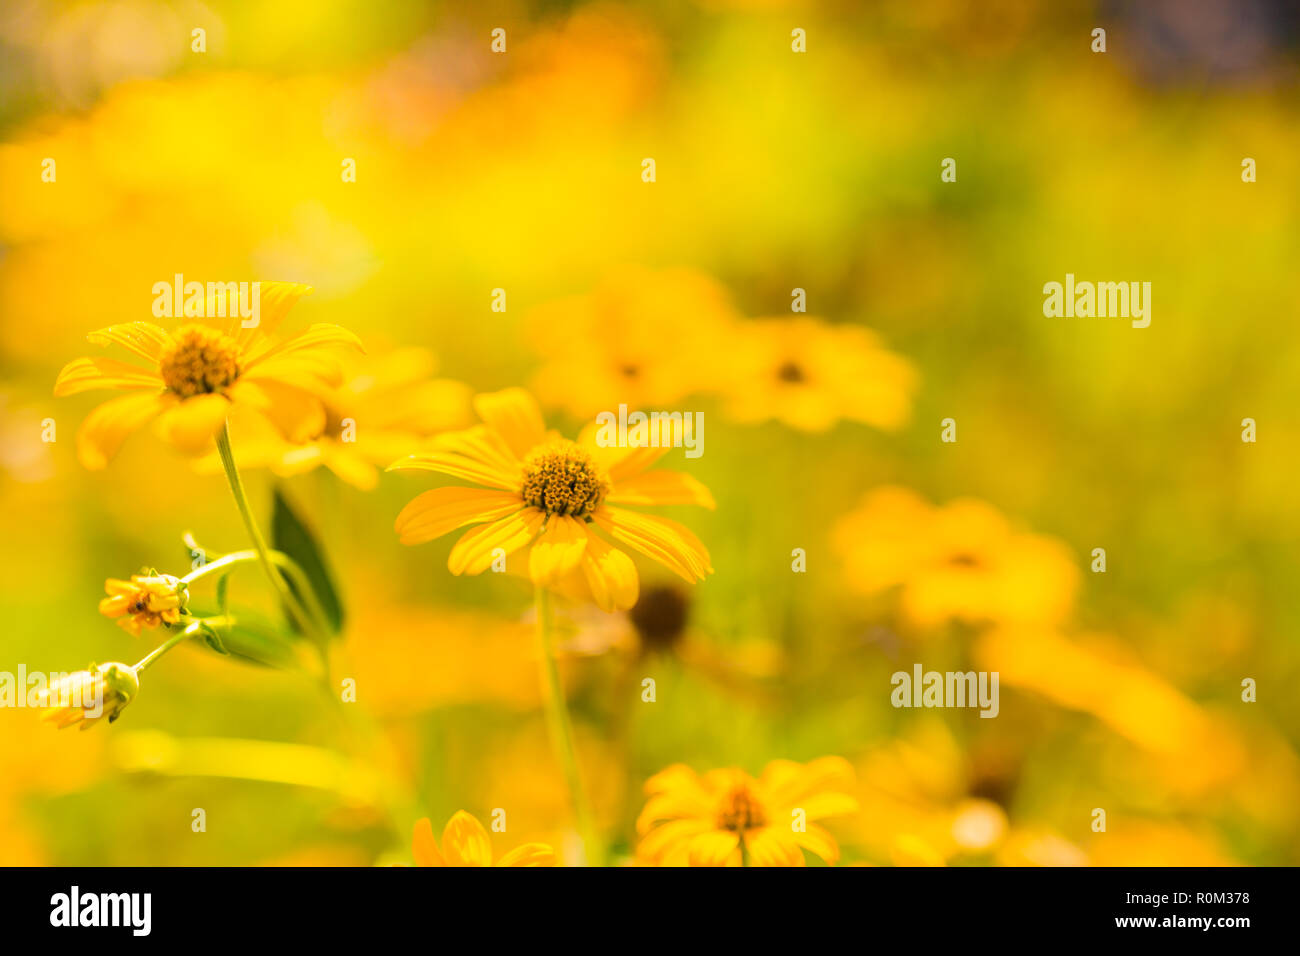 Beautiful spring summer yellow flowers and blurred bokeh background. Tranquil nature scene, blooming flowers and meadow field concept. Relaxing nature Stock Photo